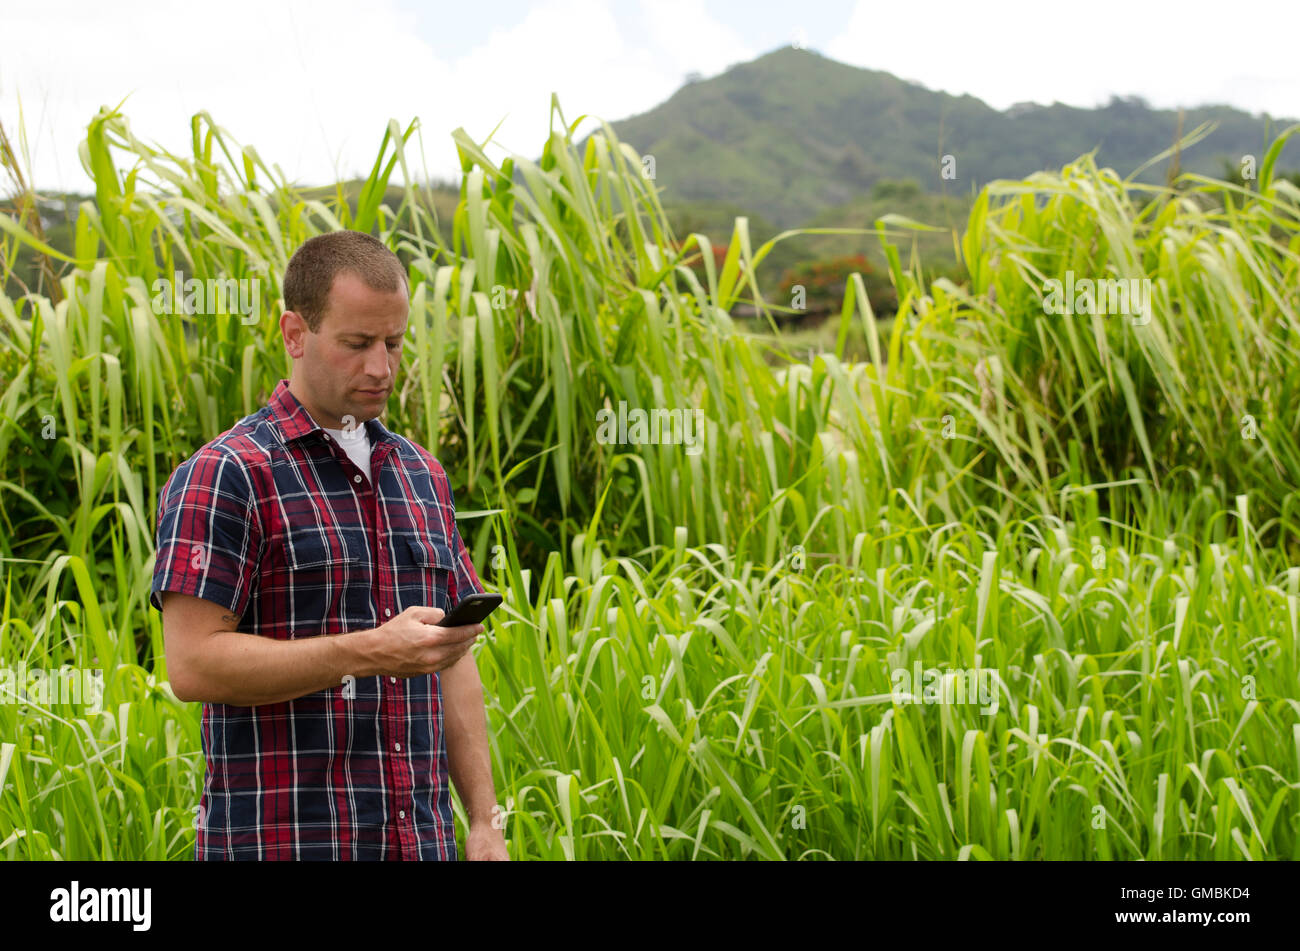 Man utilizing mobile device outside in a tropical environment wearing a collard plaid shirt. Stock Photo